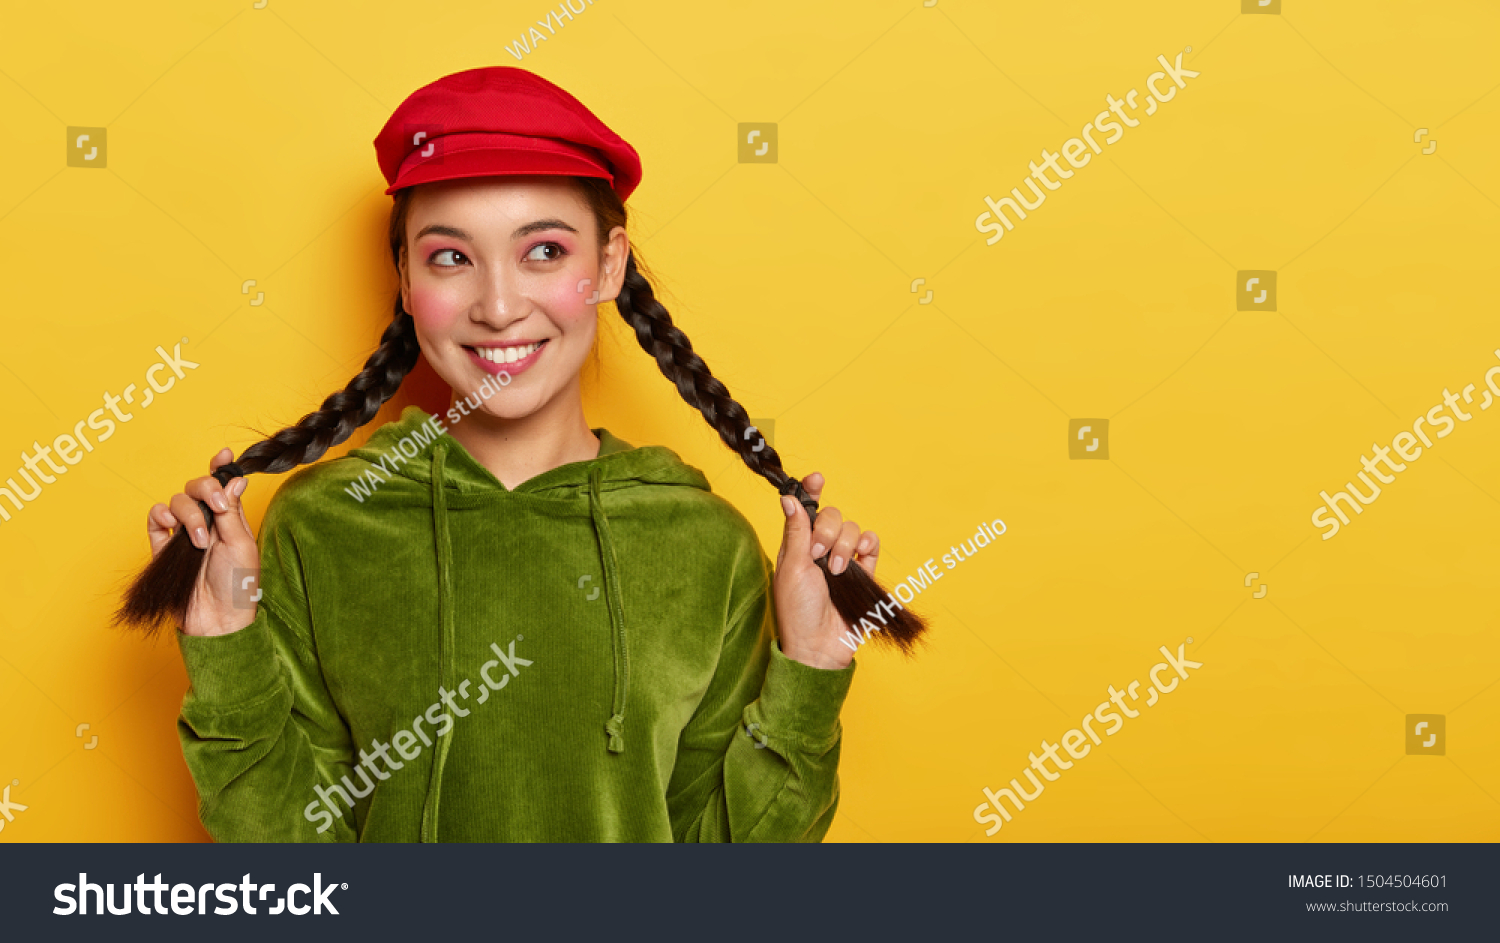 Good looking brunette woman holds two pigtails, looks away with happy expression, thinks about interesting choice, recalls lovely moment in life, wears red cap and green jumper, smiles pleasantly #1504504601